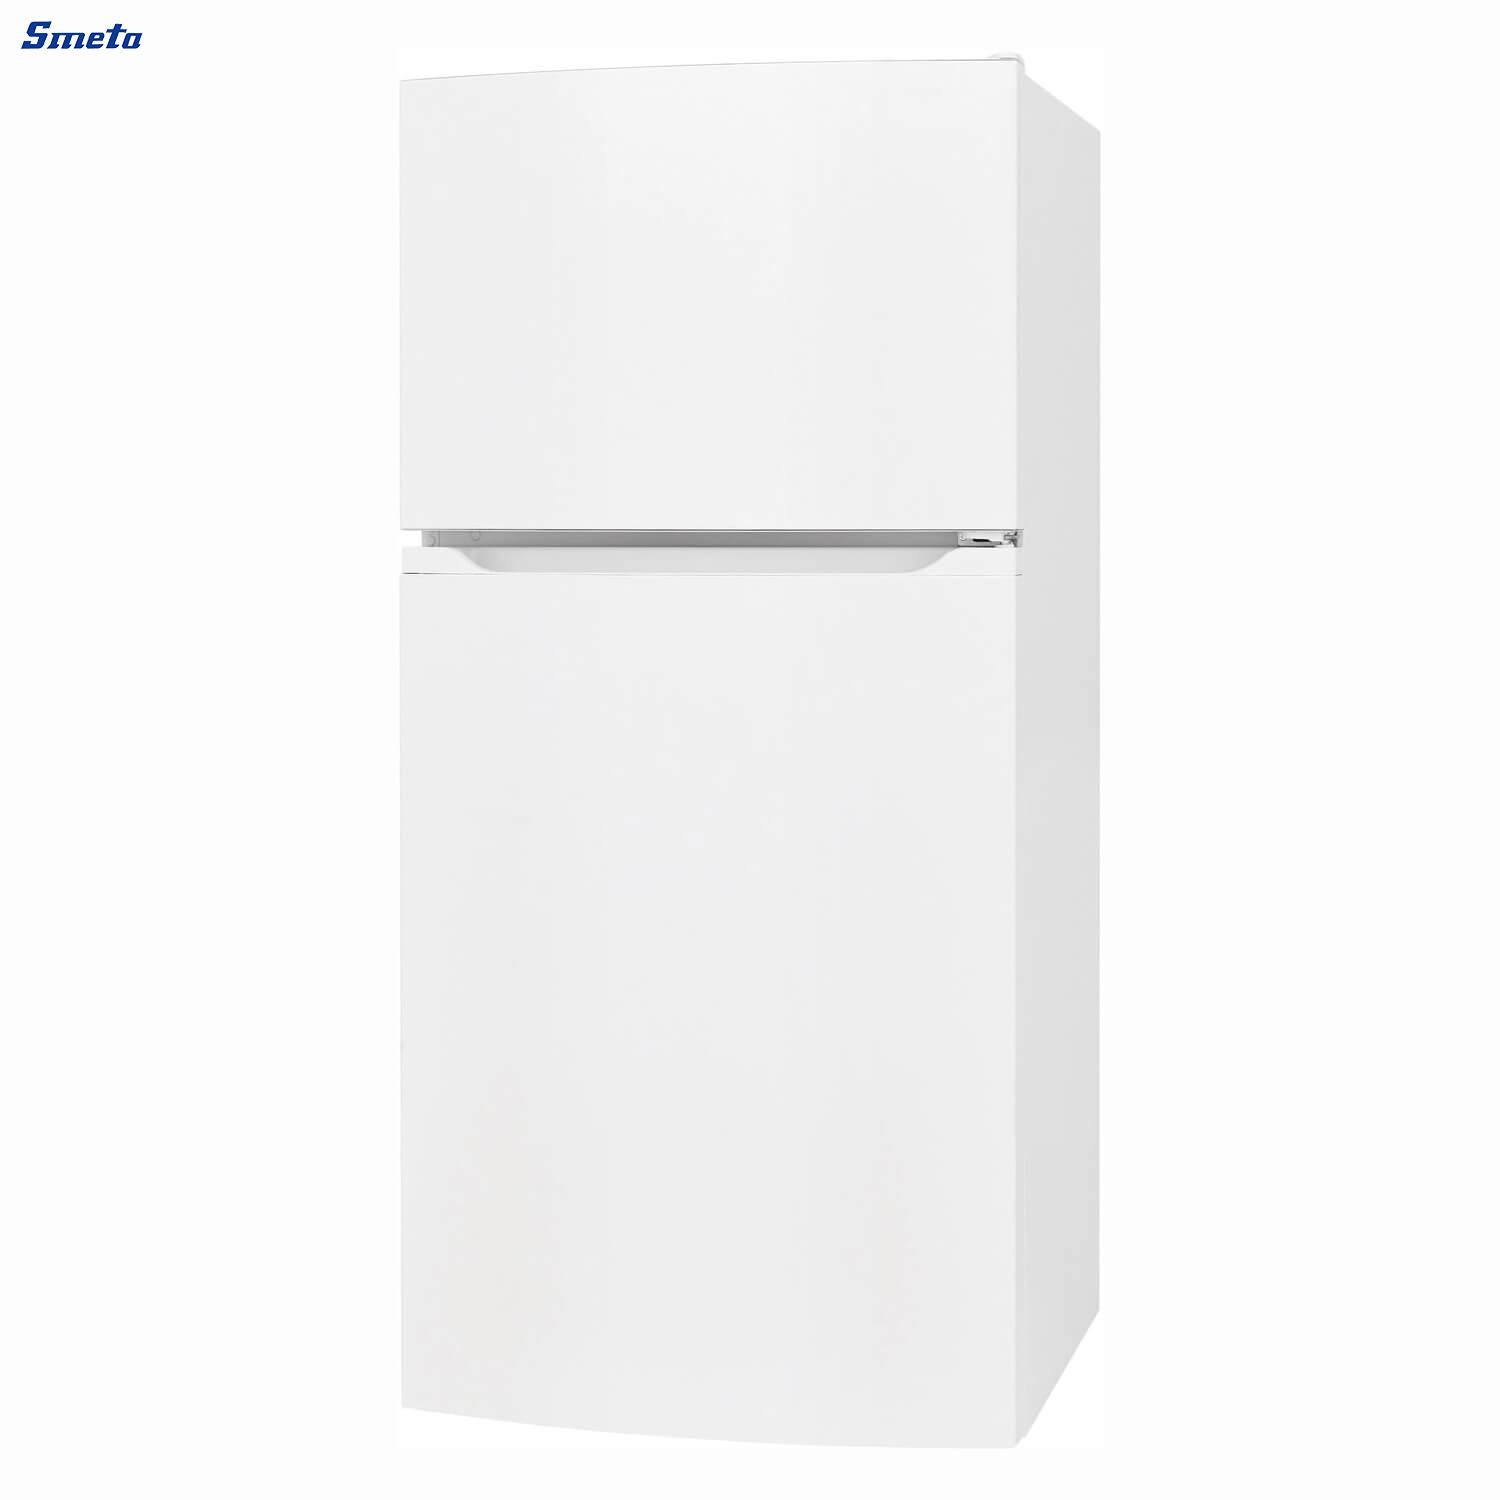 13.9 Cu. Ft. White No Frost Top Freezer Refrigerator With Garage Ready